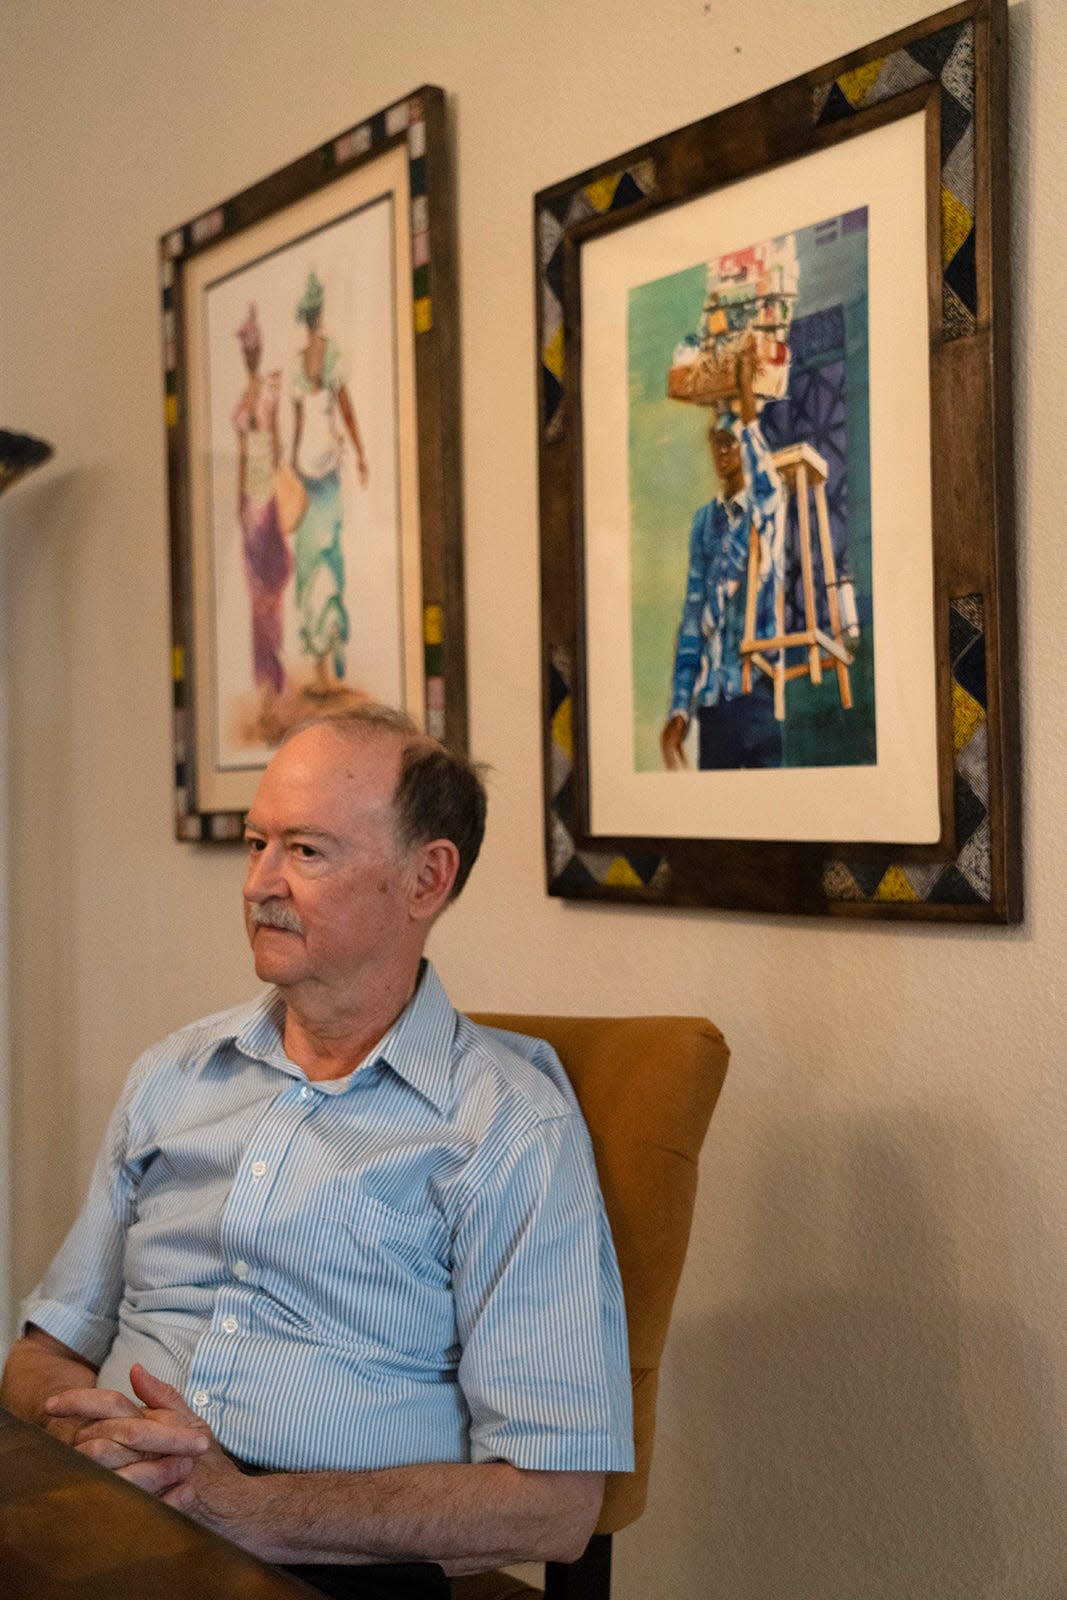 Joe Stafford discusses his time as a diplomat while at his home. He shared some wisdom about the recent coup in Niger, one of the countries where he was posted.